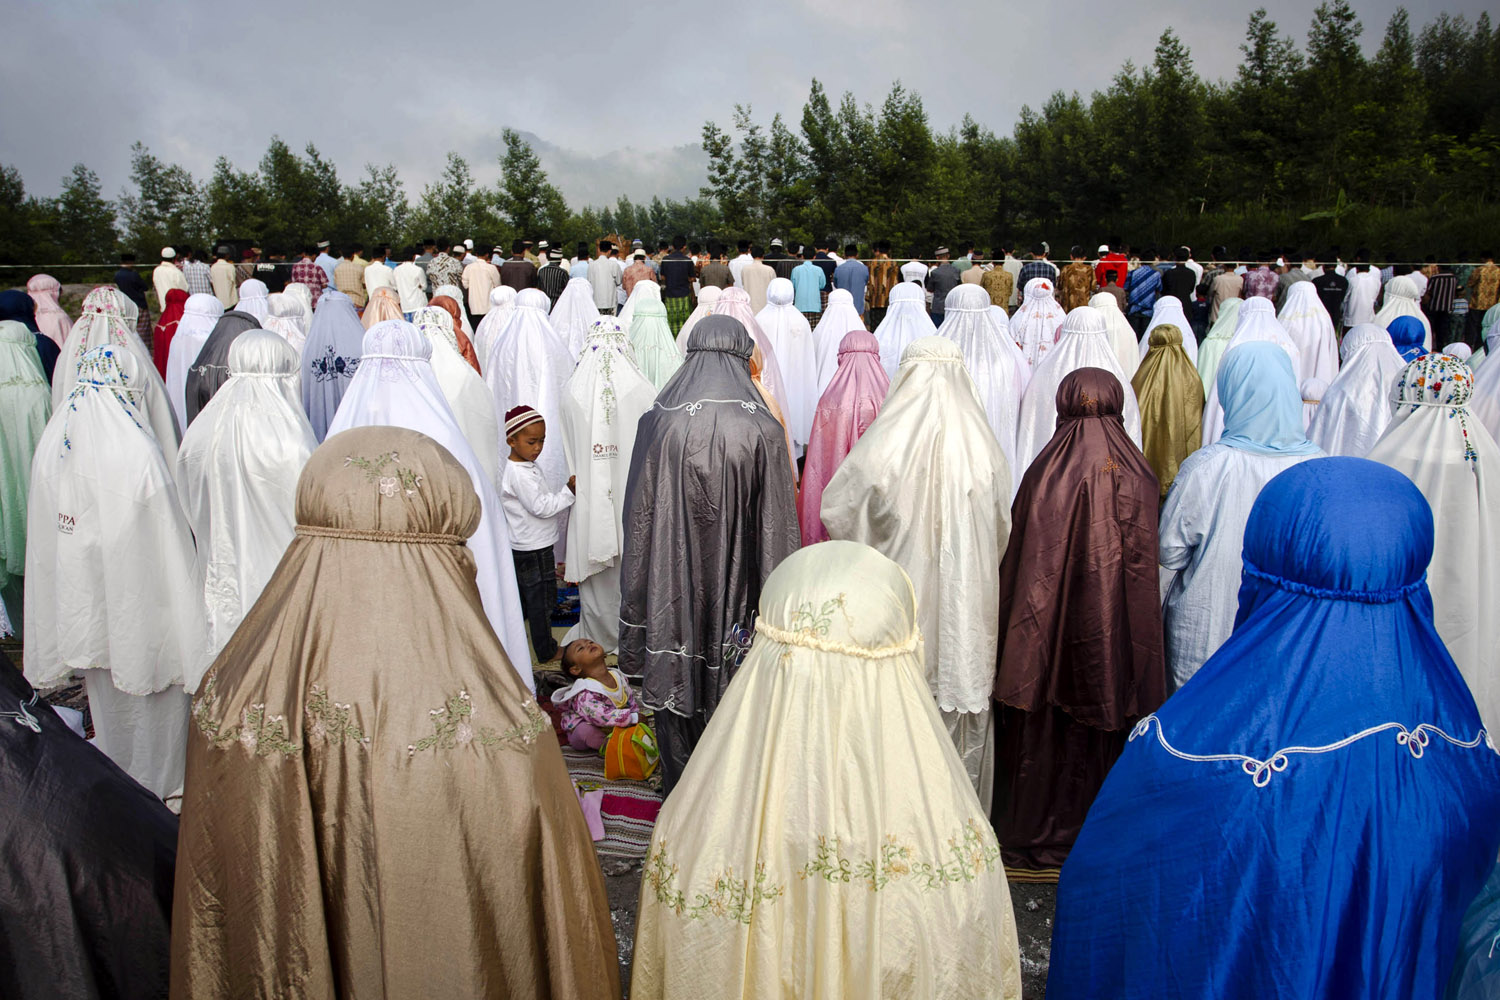 Image: Oct. 26, 2012. Indonesian Muslim women attend prayer at the slopes of Mount Merapi during celebrations for Eid al-Adha, the 'Festival of Sacrifice', at Kalitengah Lor village in Yogyakarta, Indonesia.